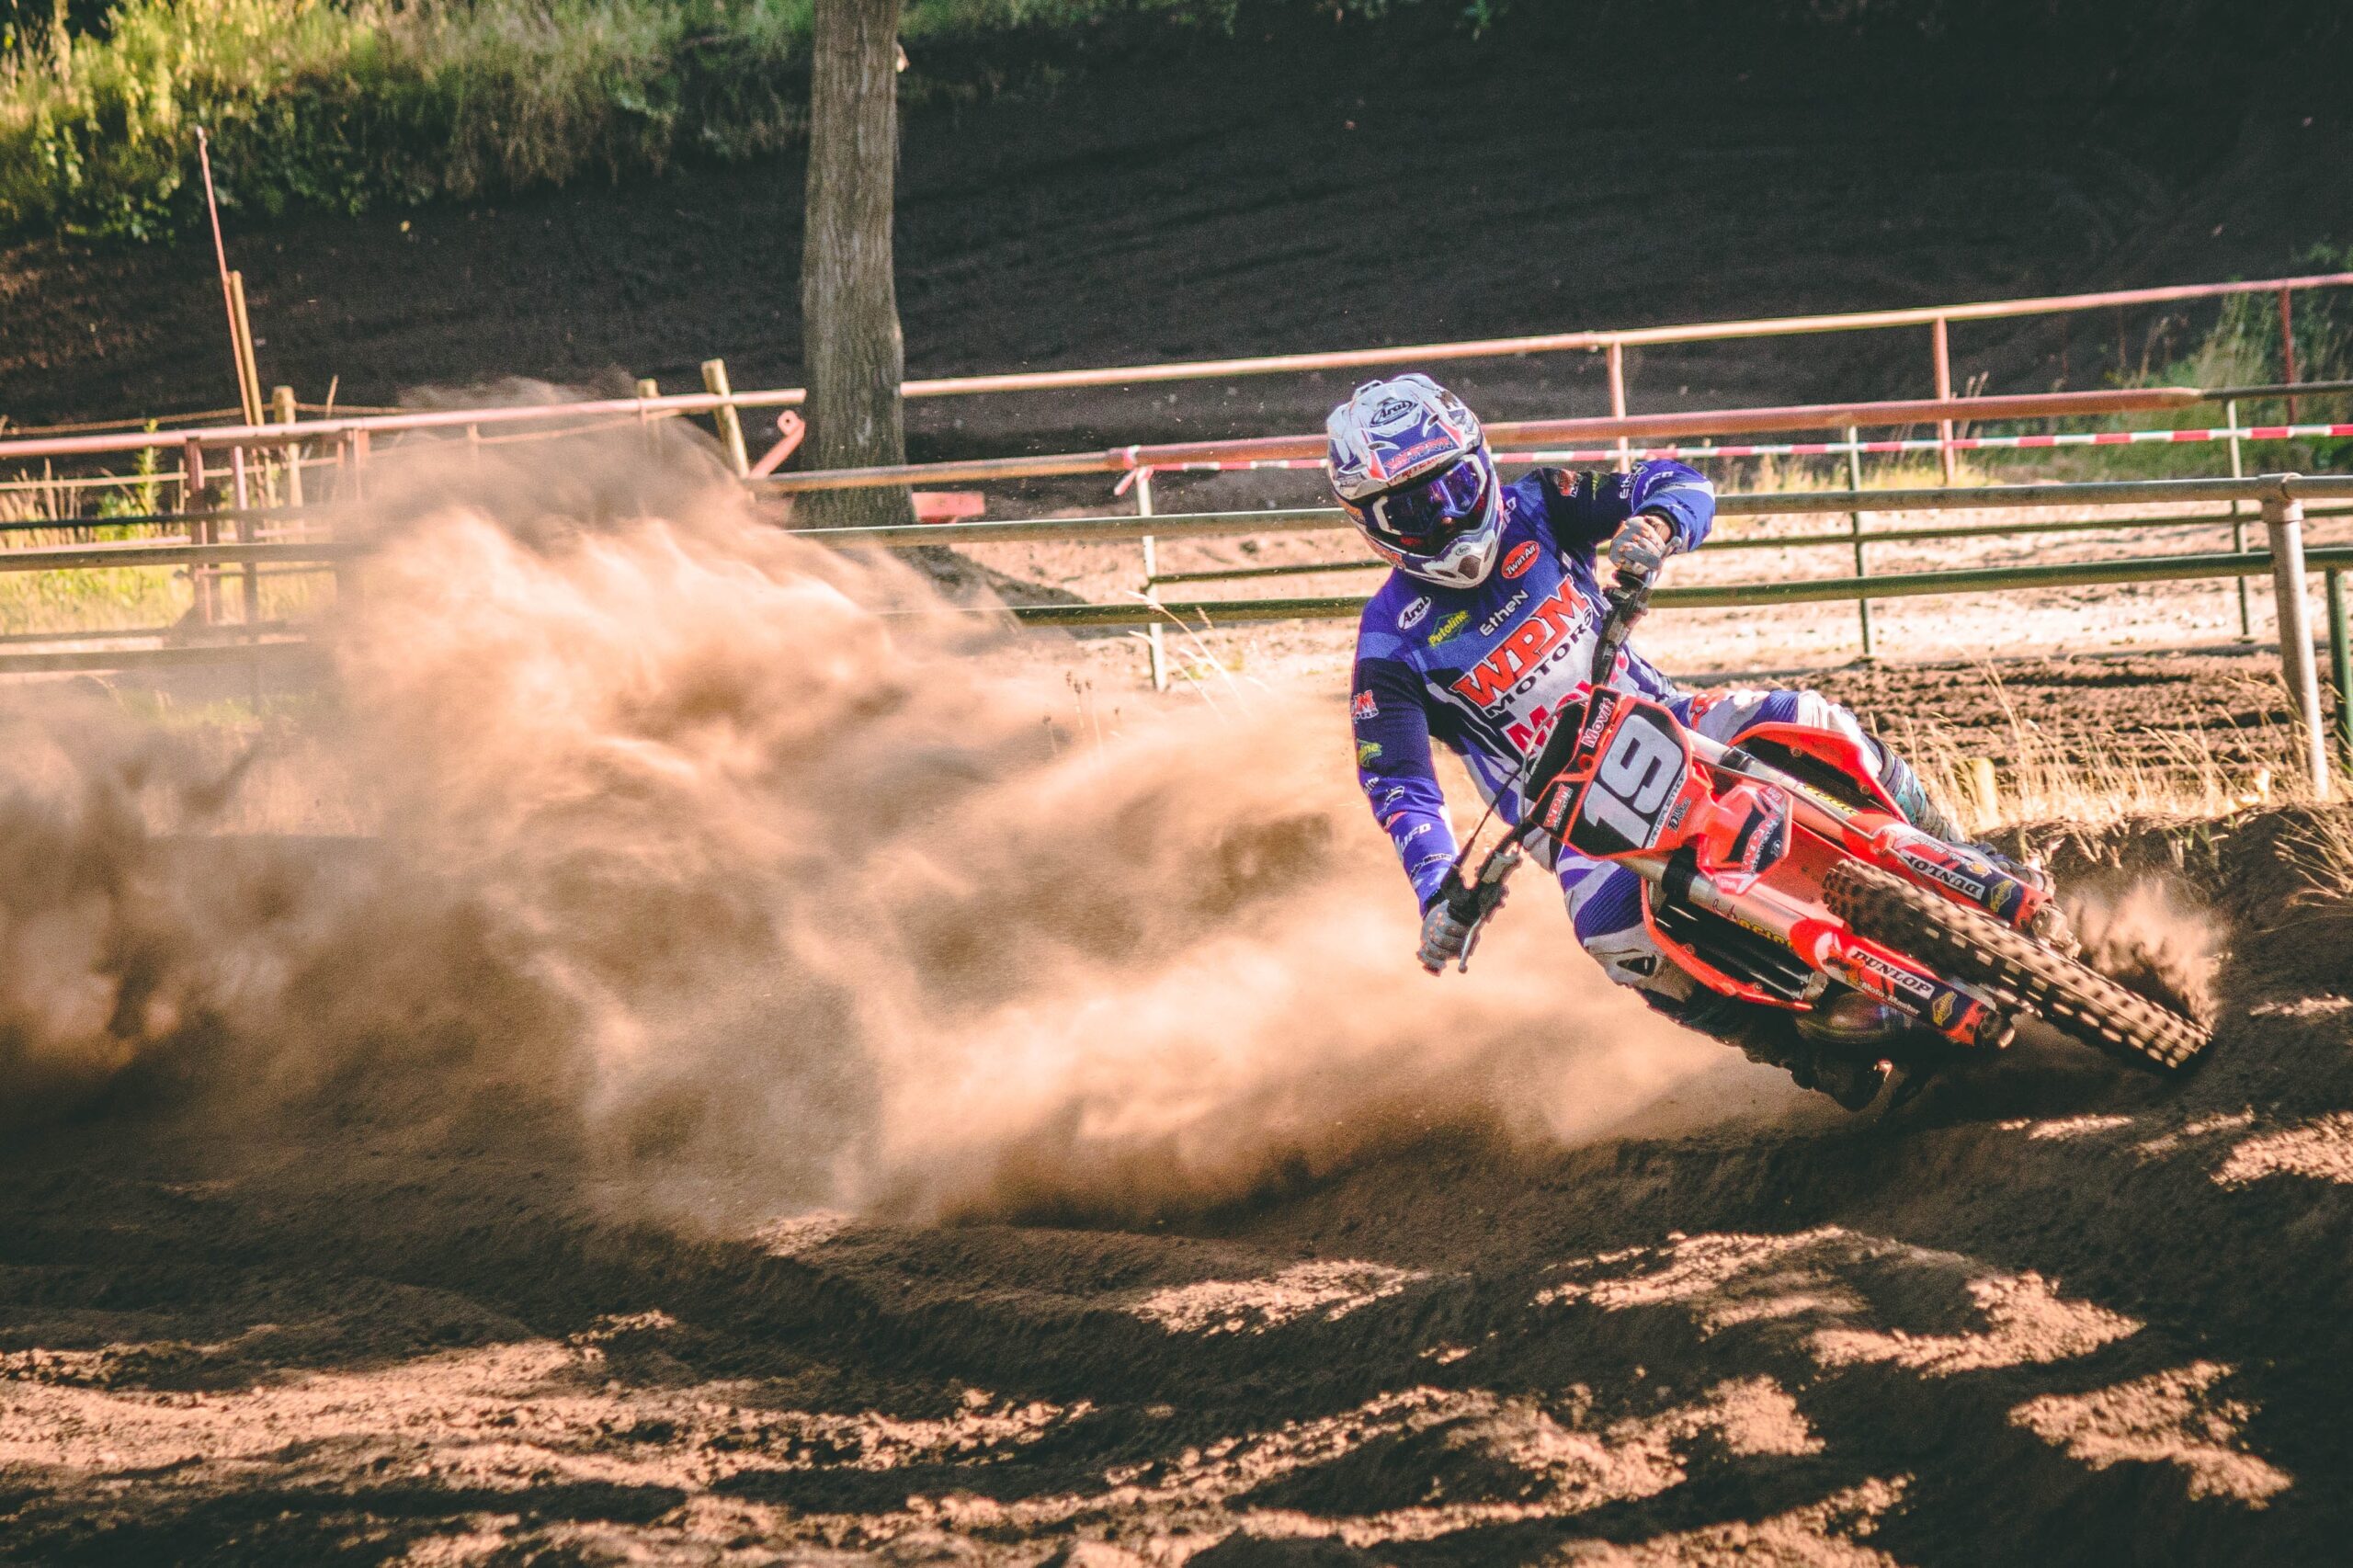 top 8 off-road riding tips: corning the dirt bike